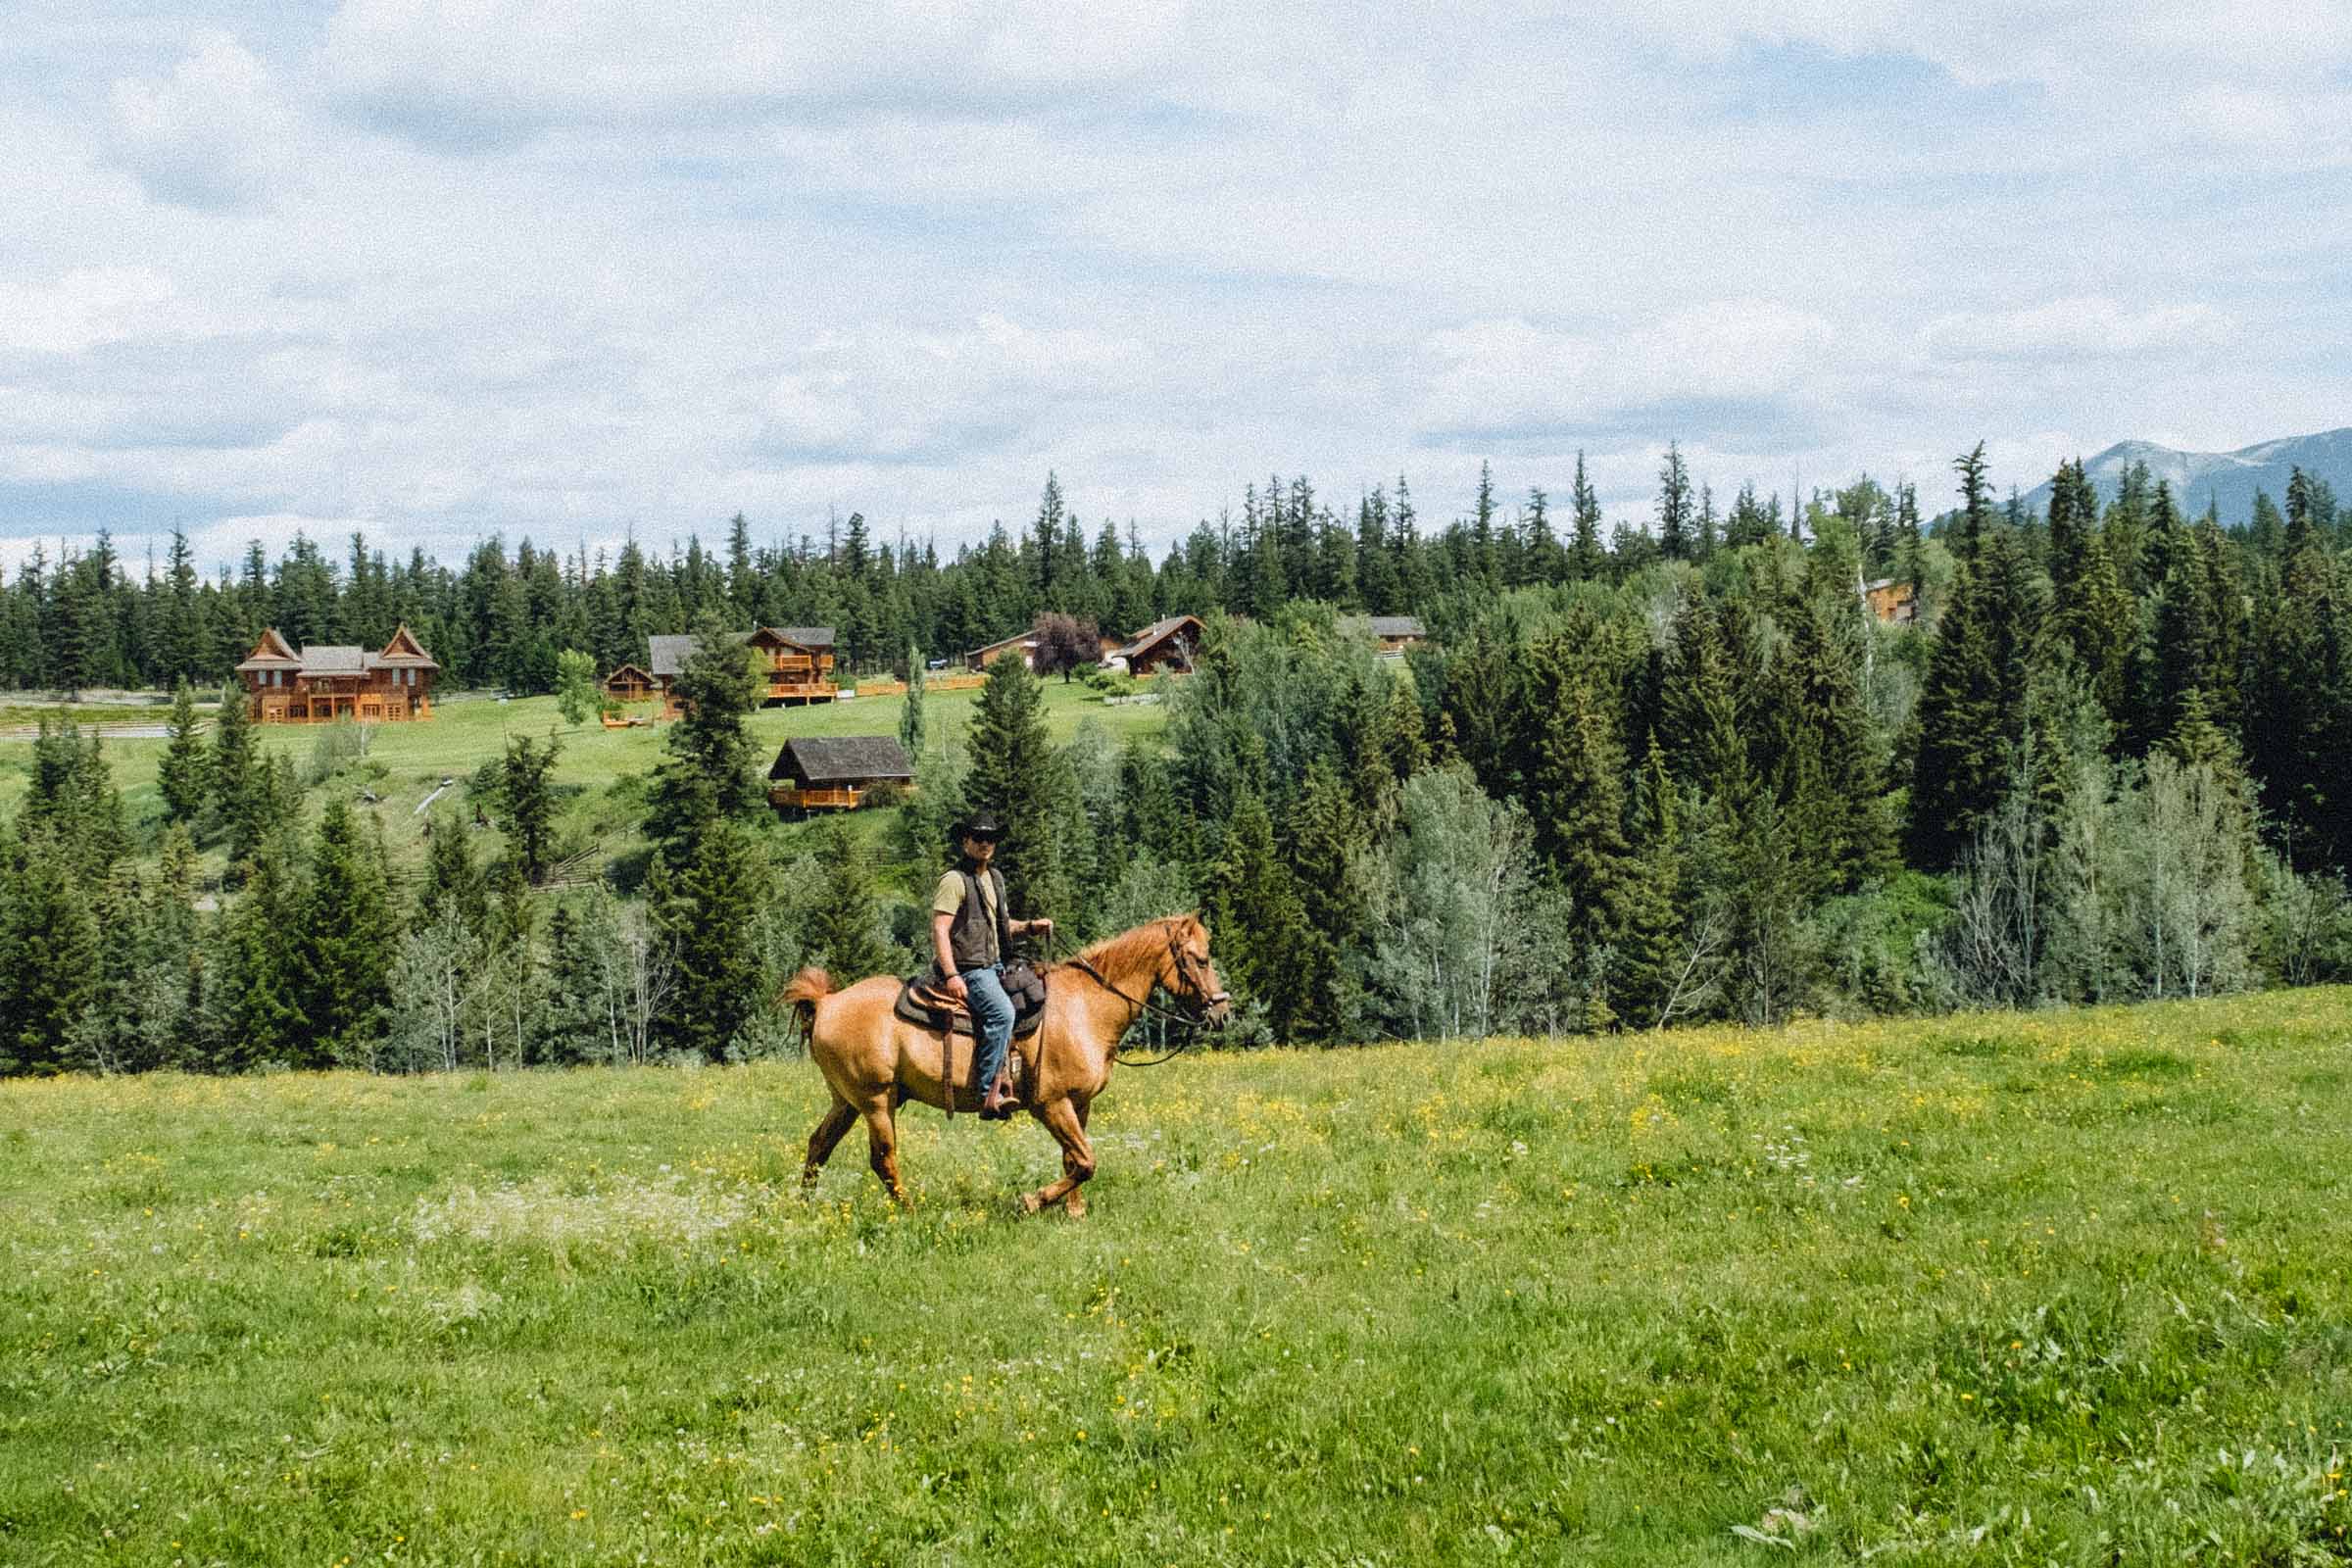 Out and about on a horseback ride in the Cariboo